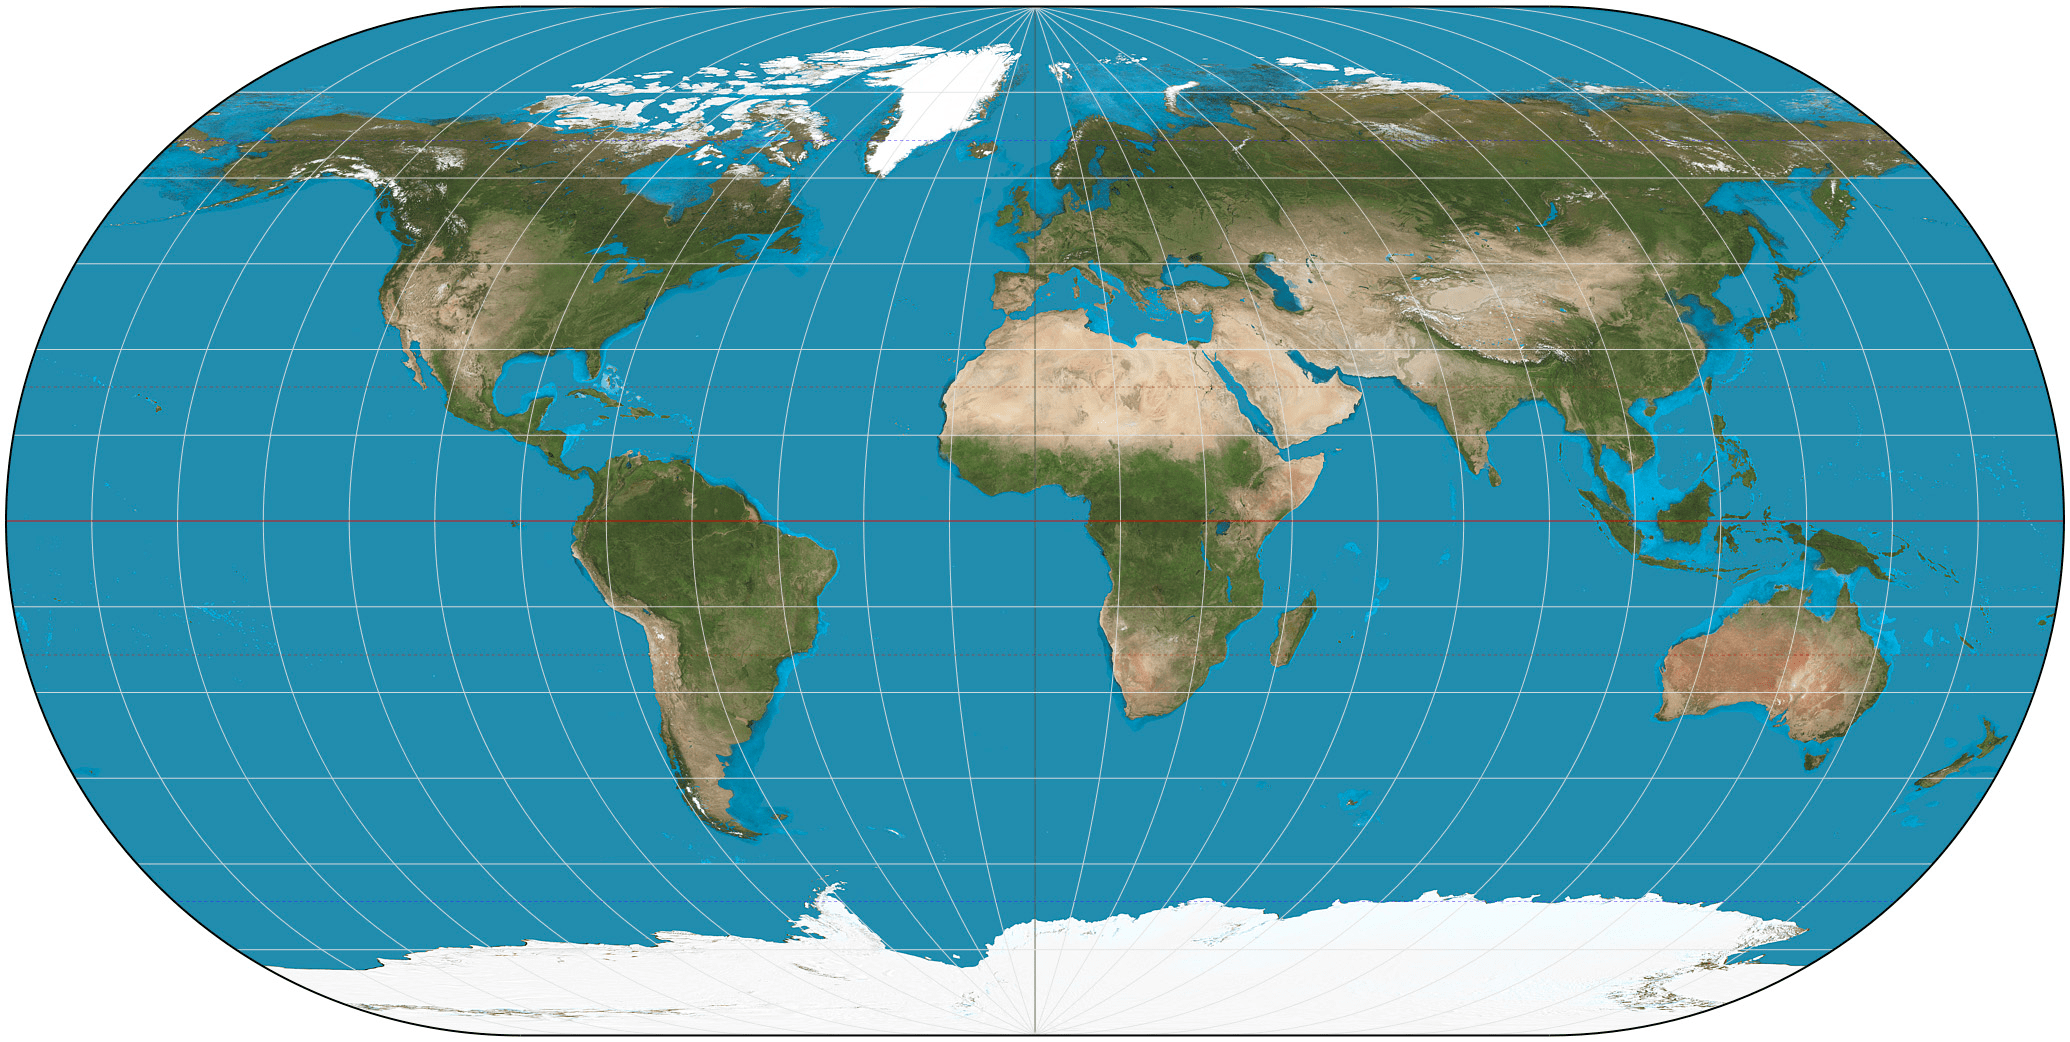 An Ortelius oval projection of the Earth